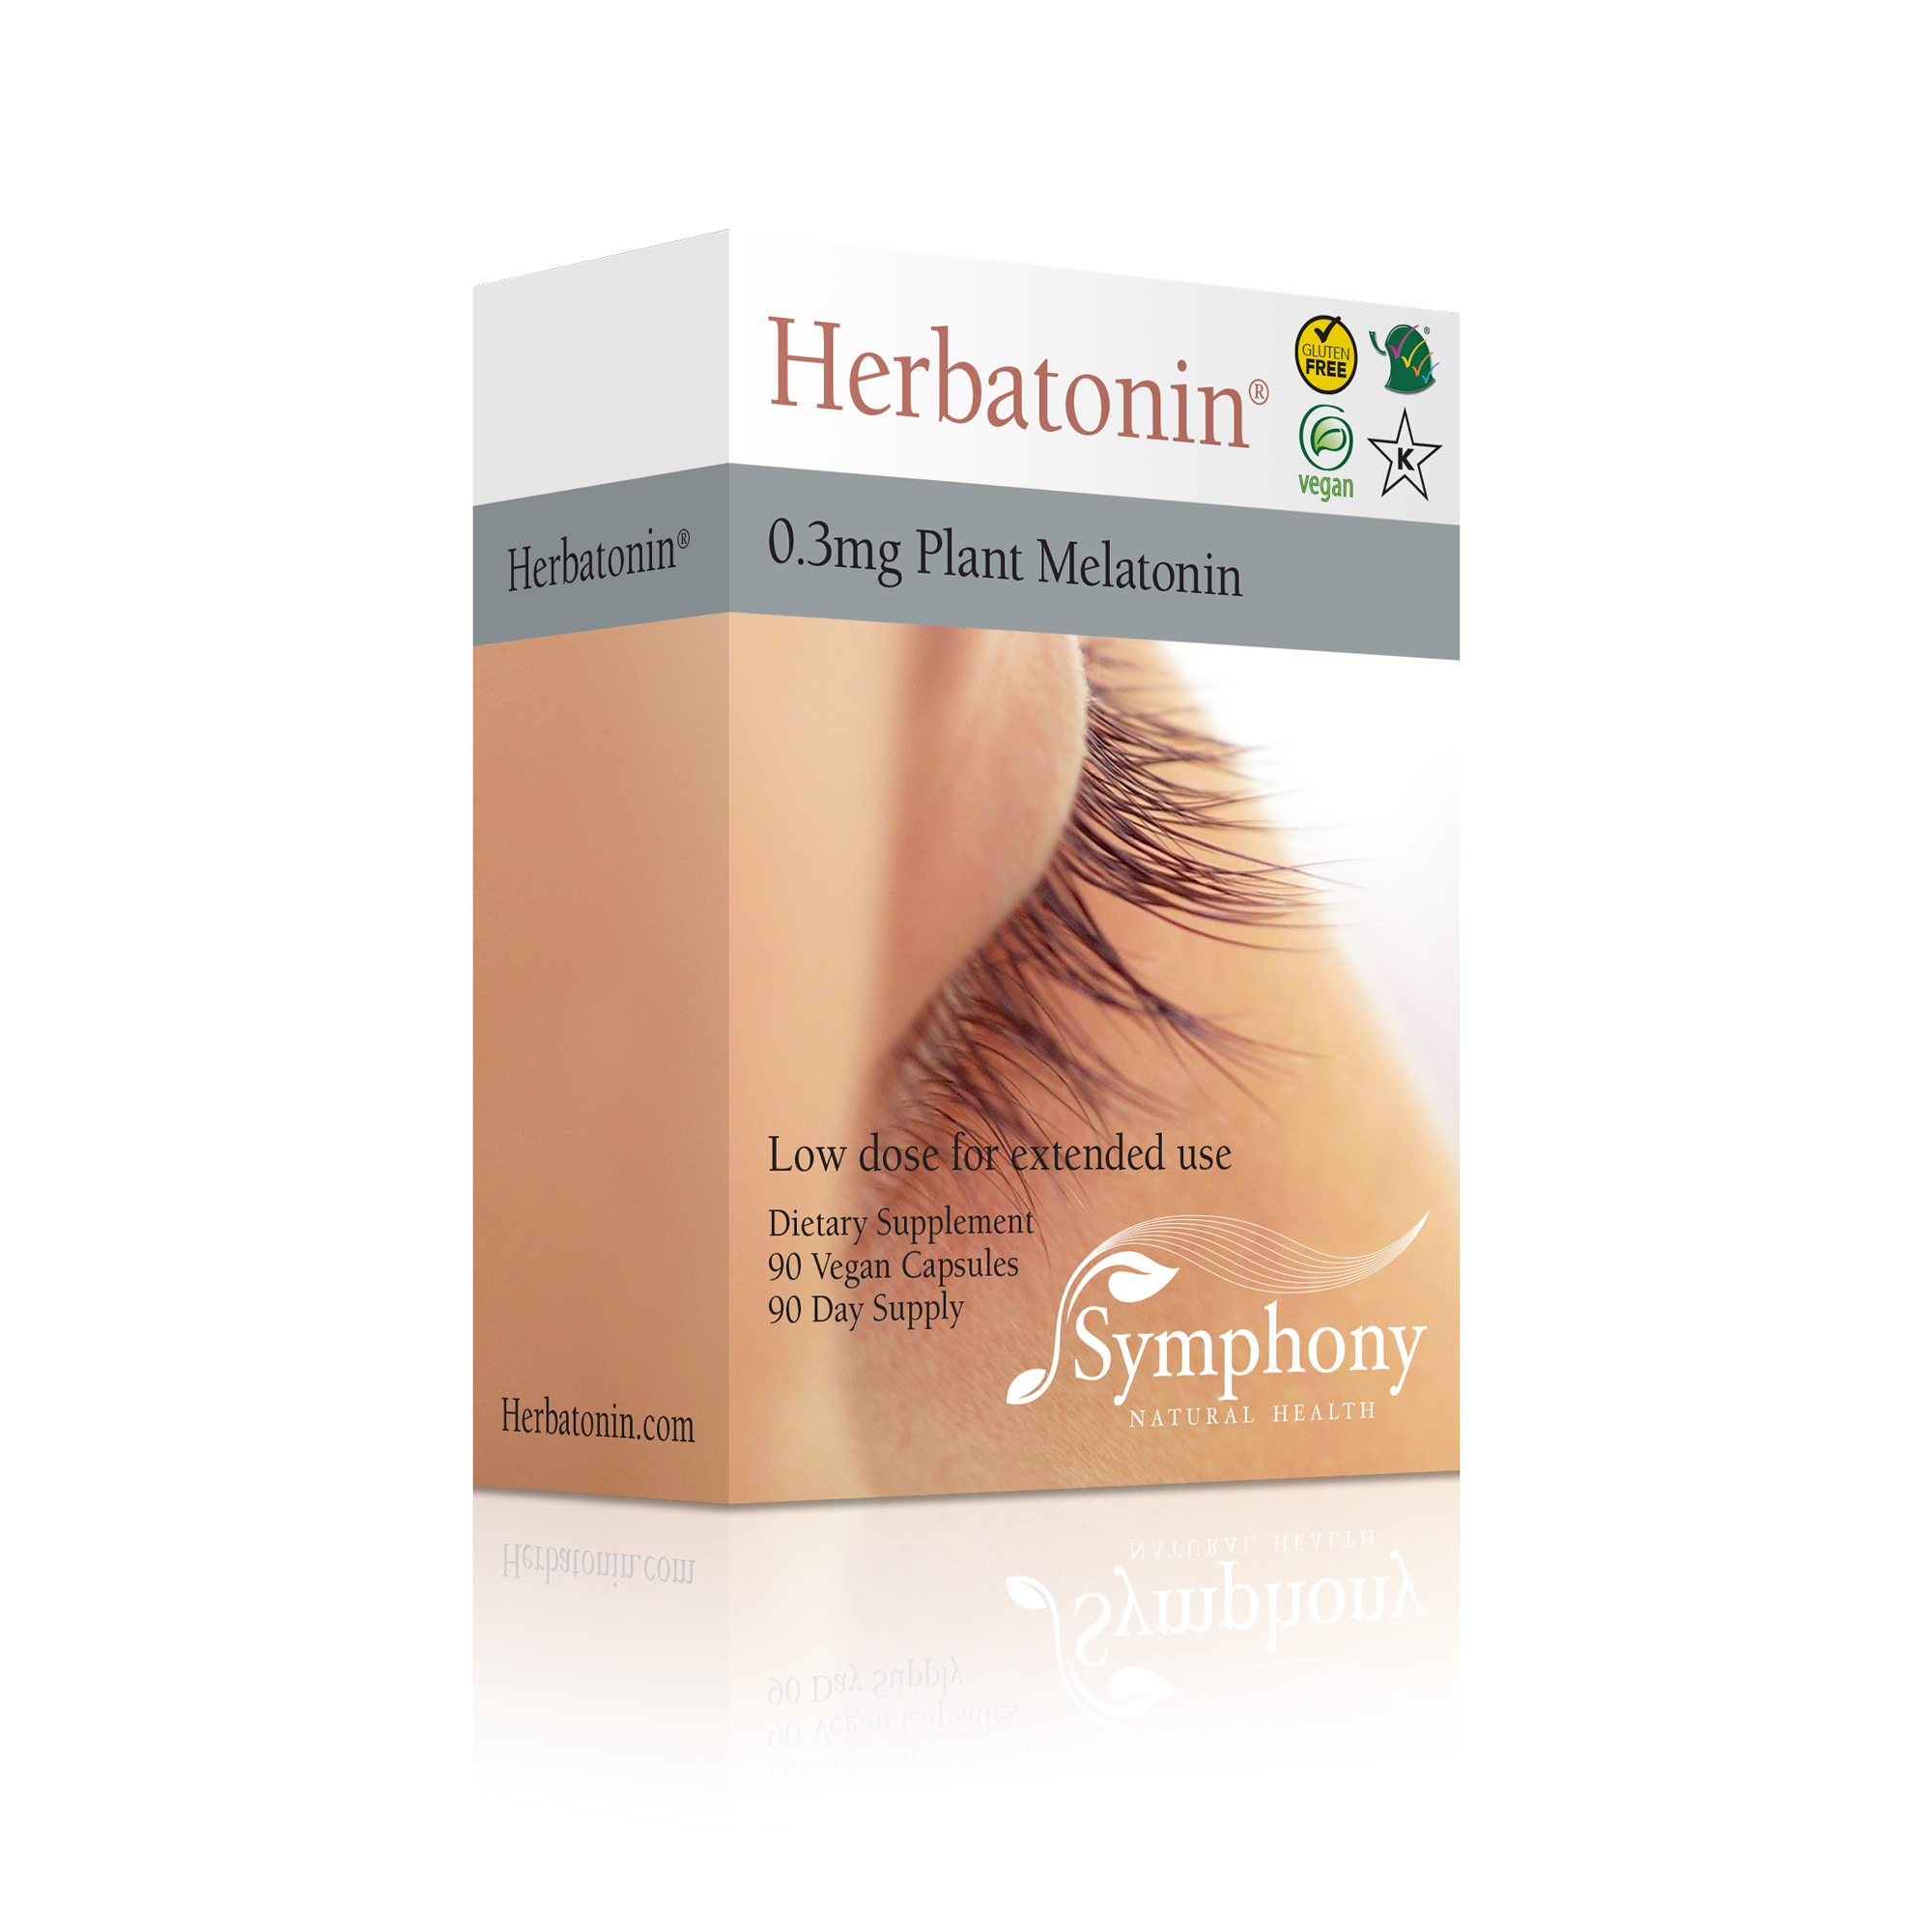 Herbatonin 0.3mg right-facing front and side of two product boxes on black background Herbatonin brown logo on white background, low dose for extended use, white female face cropped showing closed eyelid, gluten free, vegan and Kosher logos, symphony logo, 